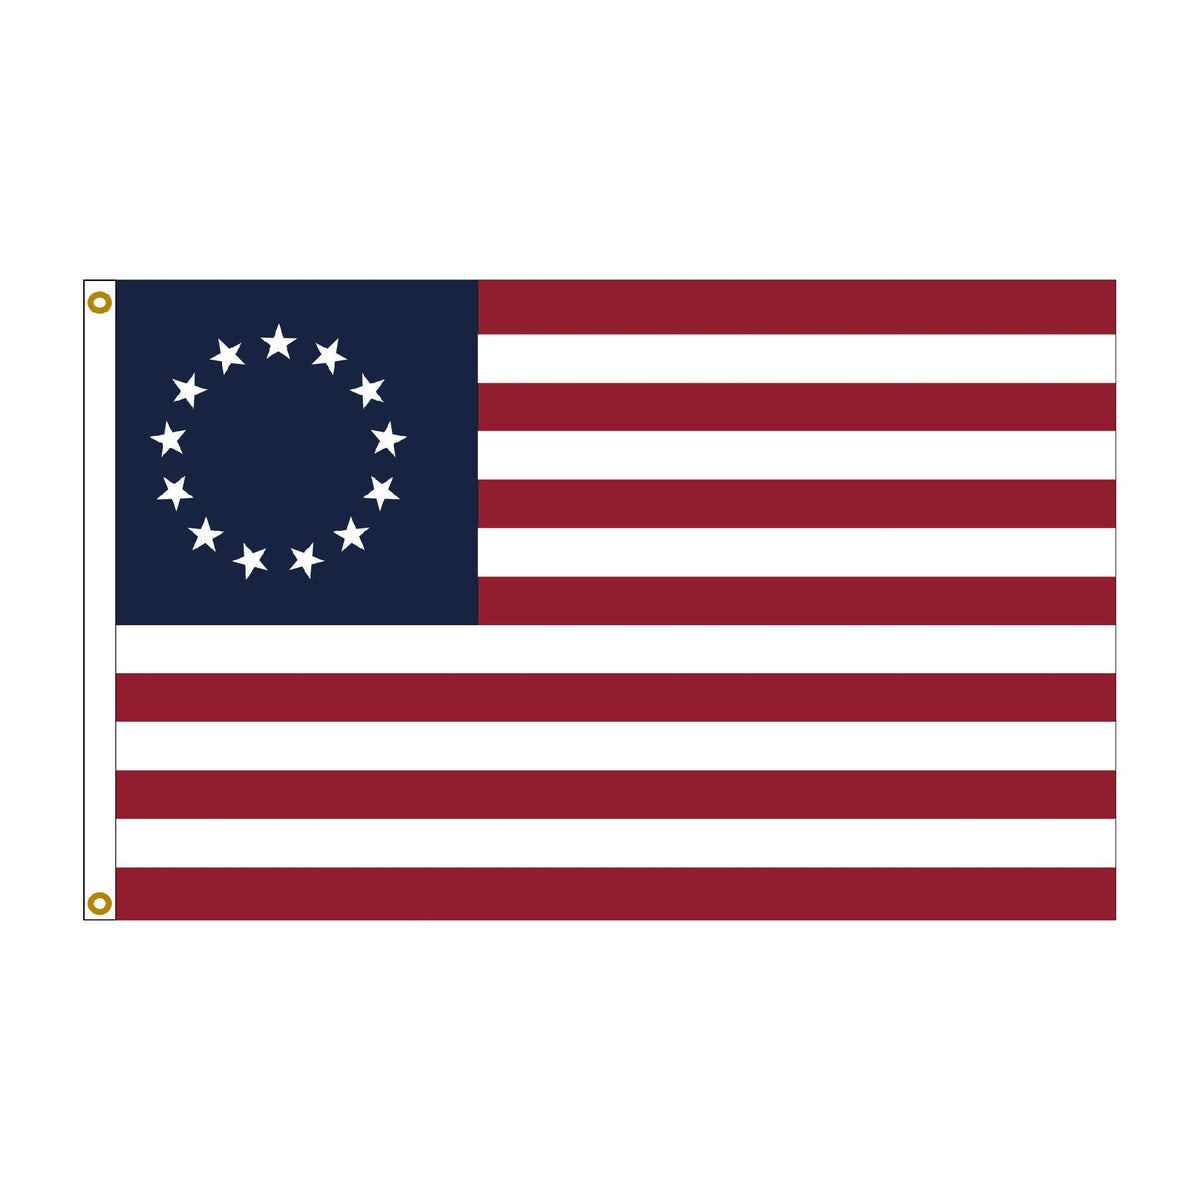 Betsy Ross flags in historical cotton or durable nylon for outdoors.